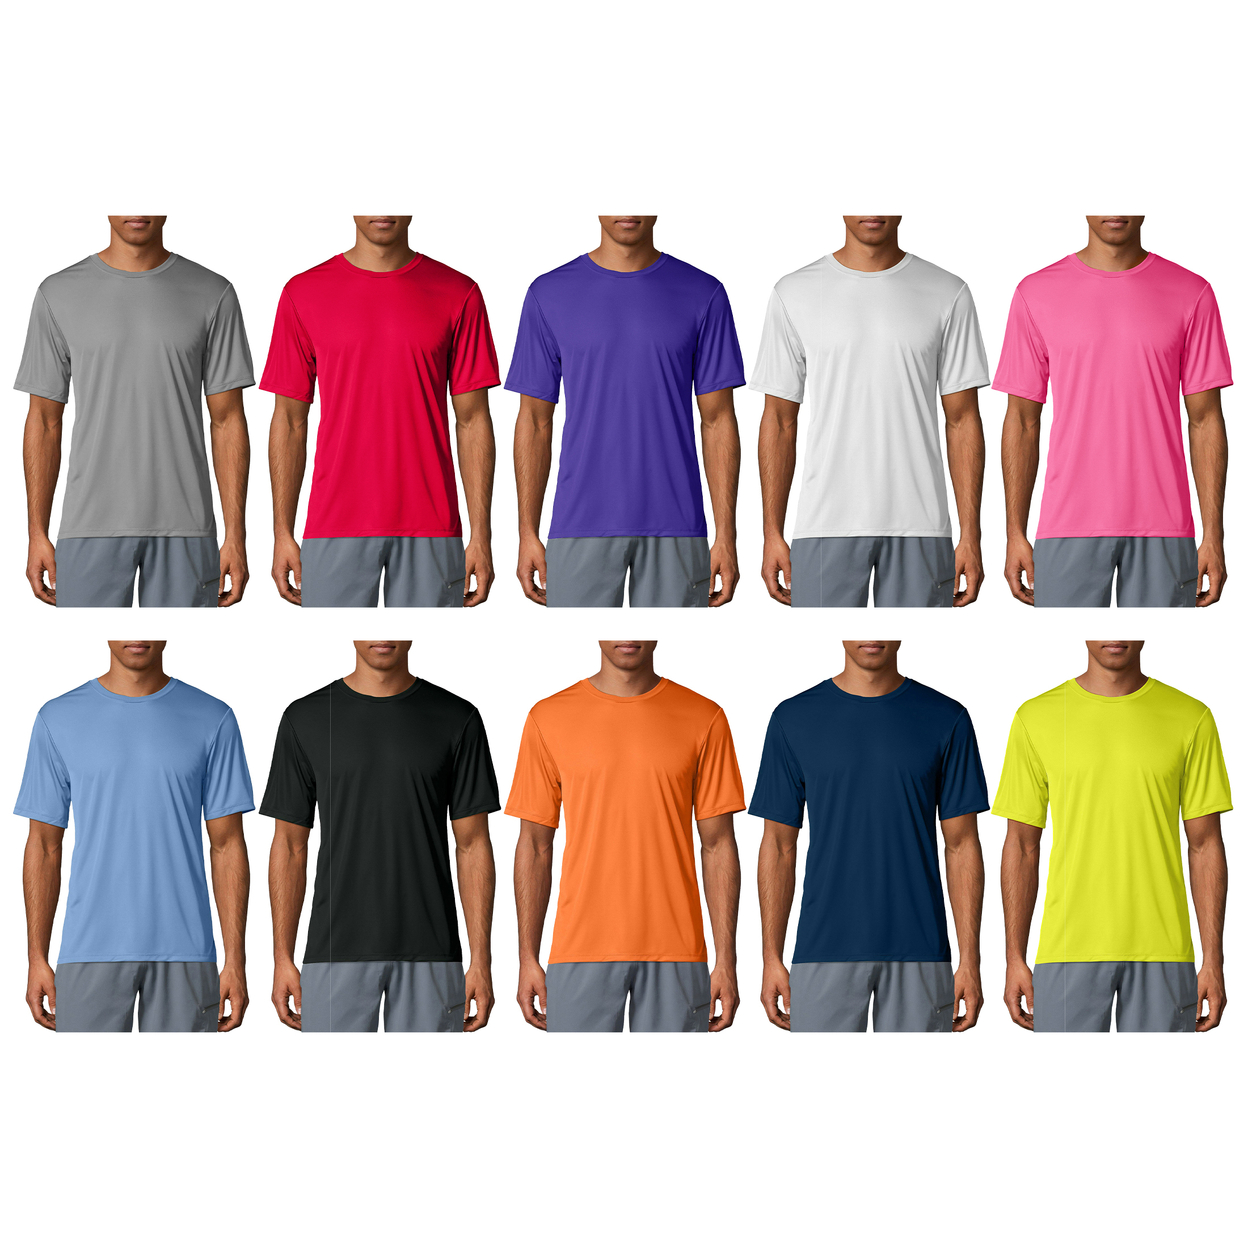 4-Pack: Men's Moisture Wicking Cool Dri-Fit Performance Short Sleeve Crew Neck T-Shirts - X-large